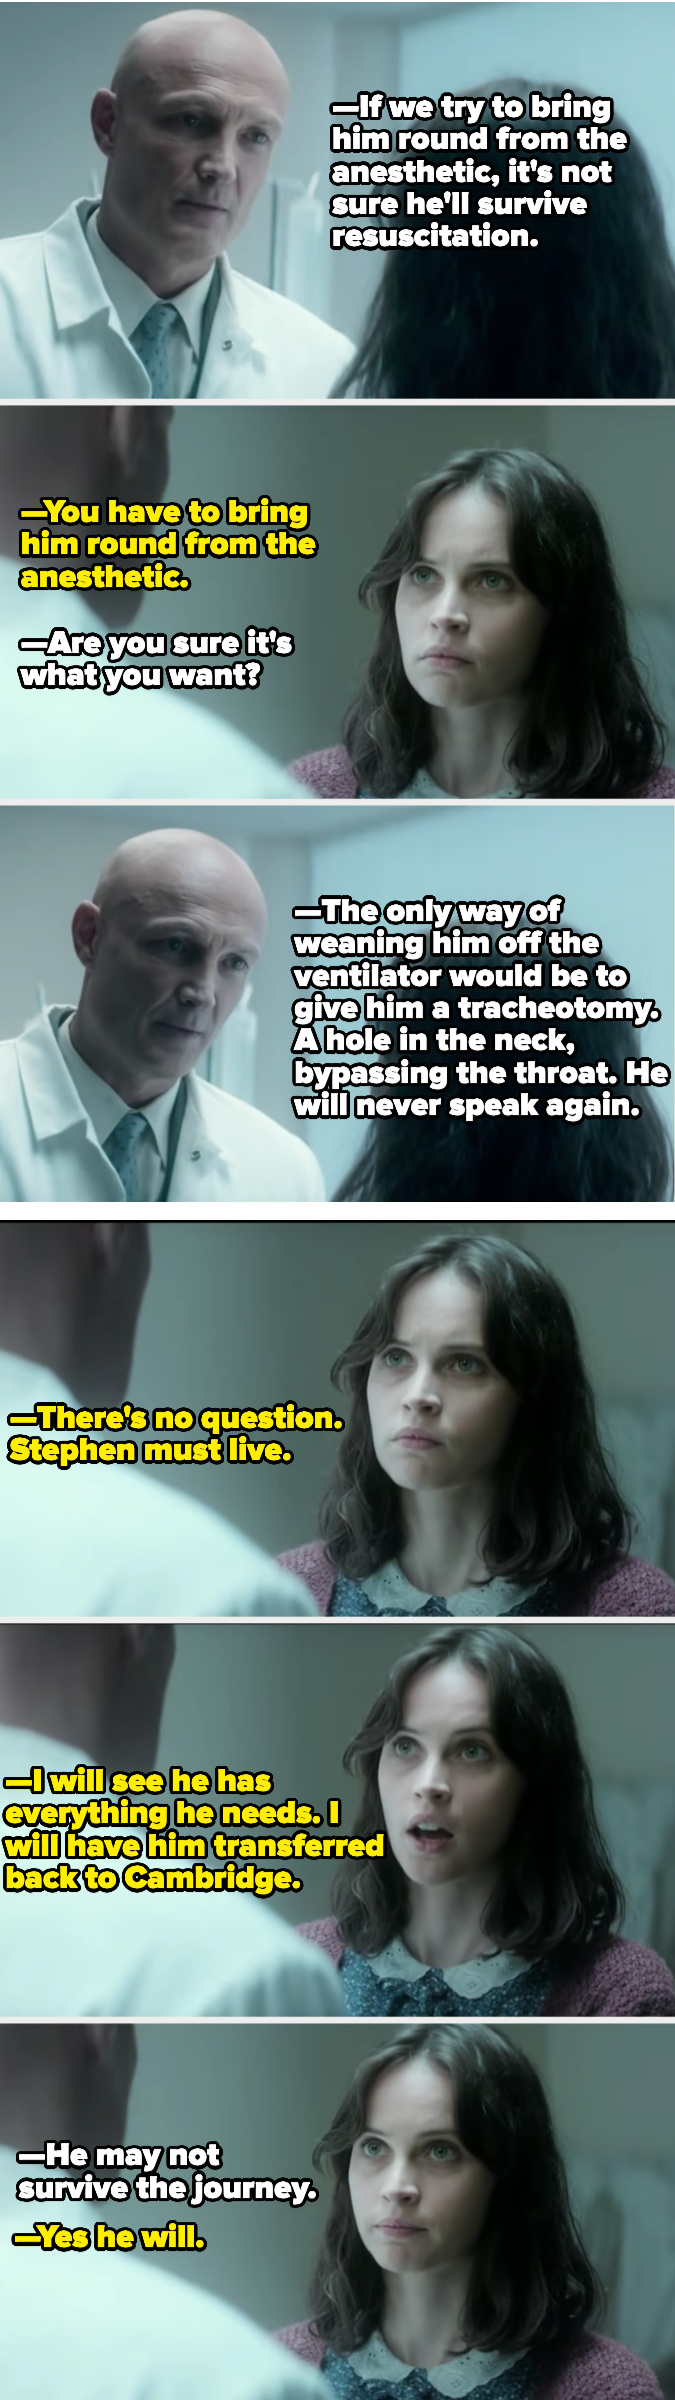 Jane tells the Swiss doctor that Stephen will survive a tracheotomy